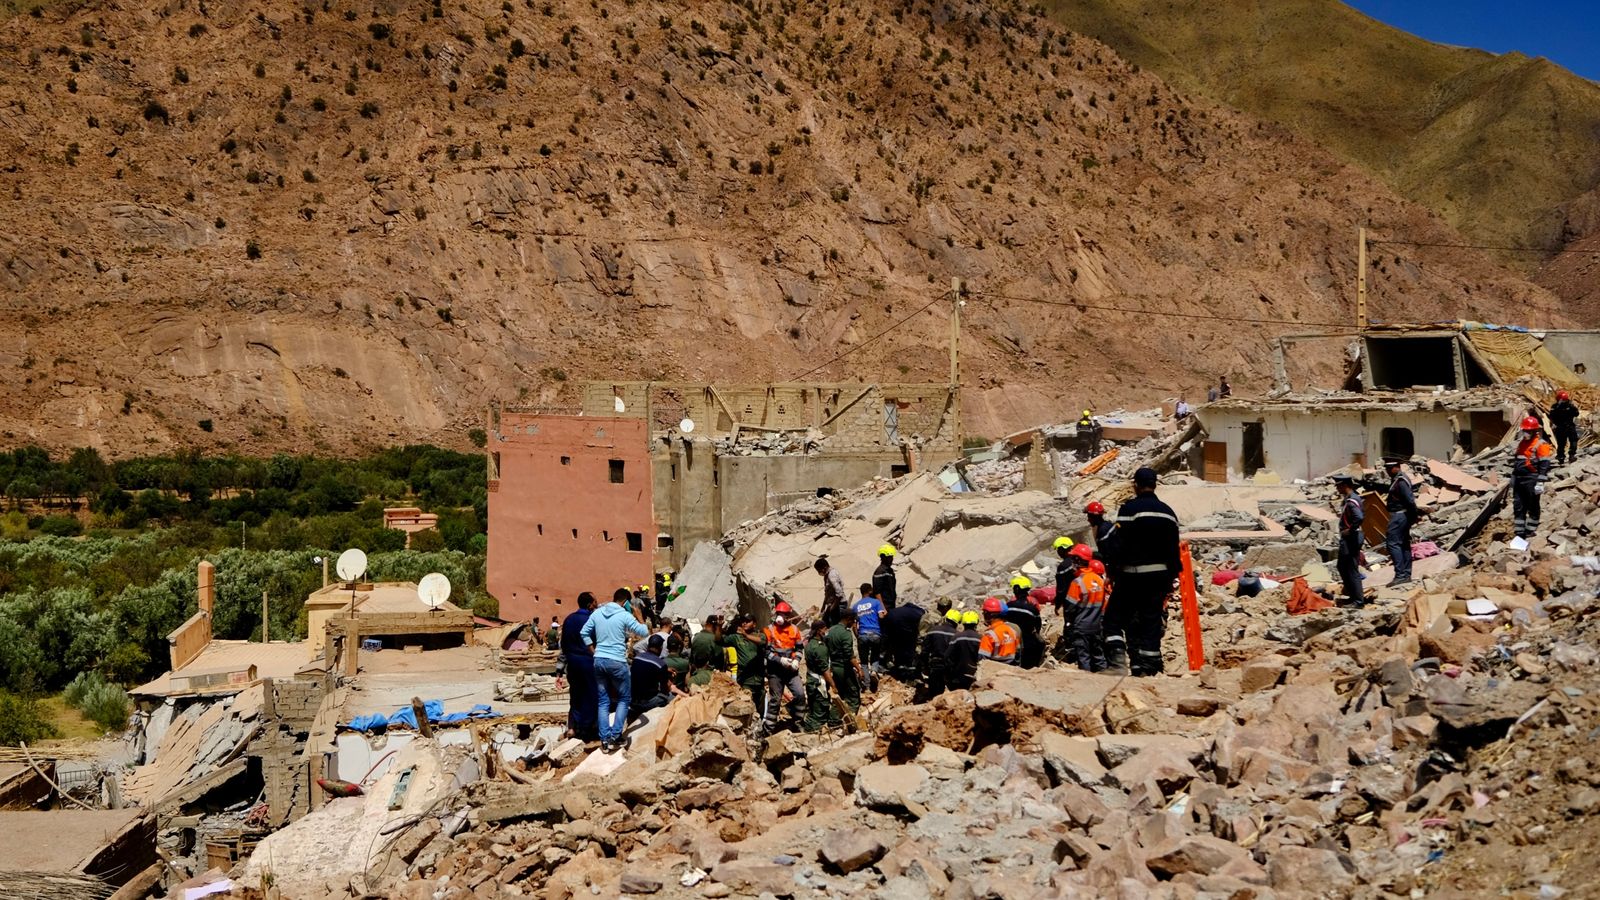 Morocco earthquake: Hope is fading in Talat Nyakoub where the stench of dead bodies is 'overpowering'